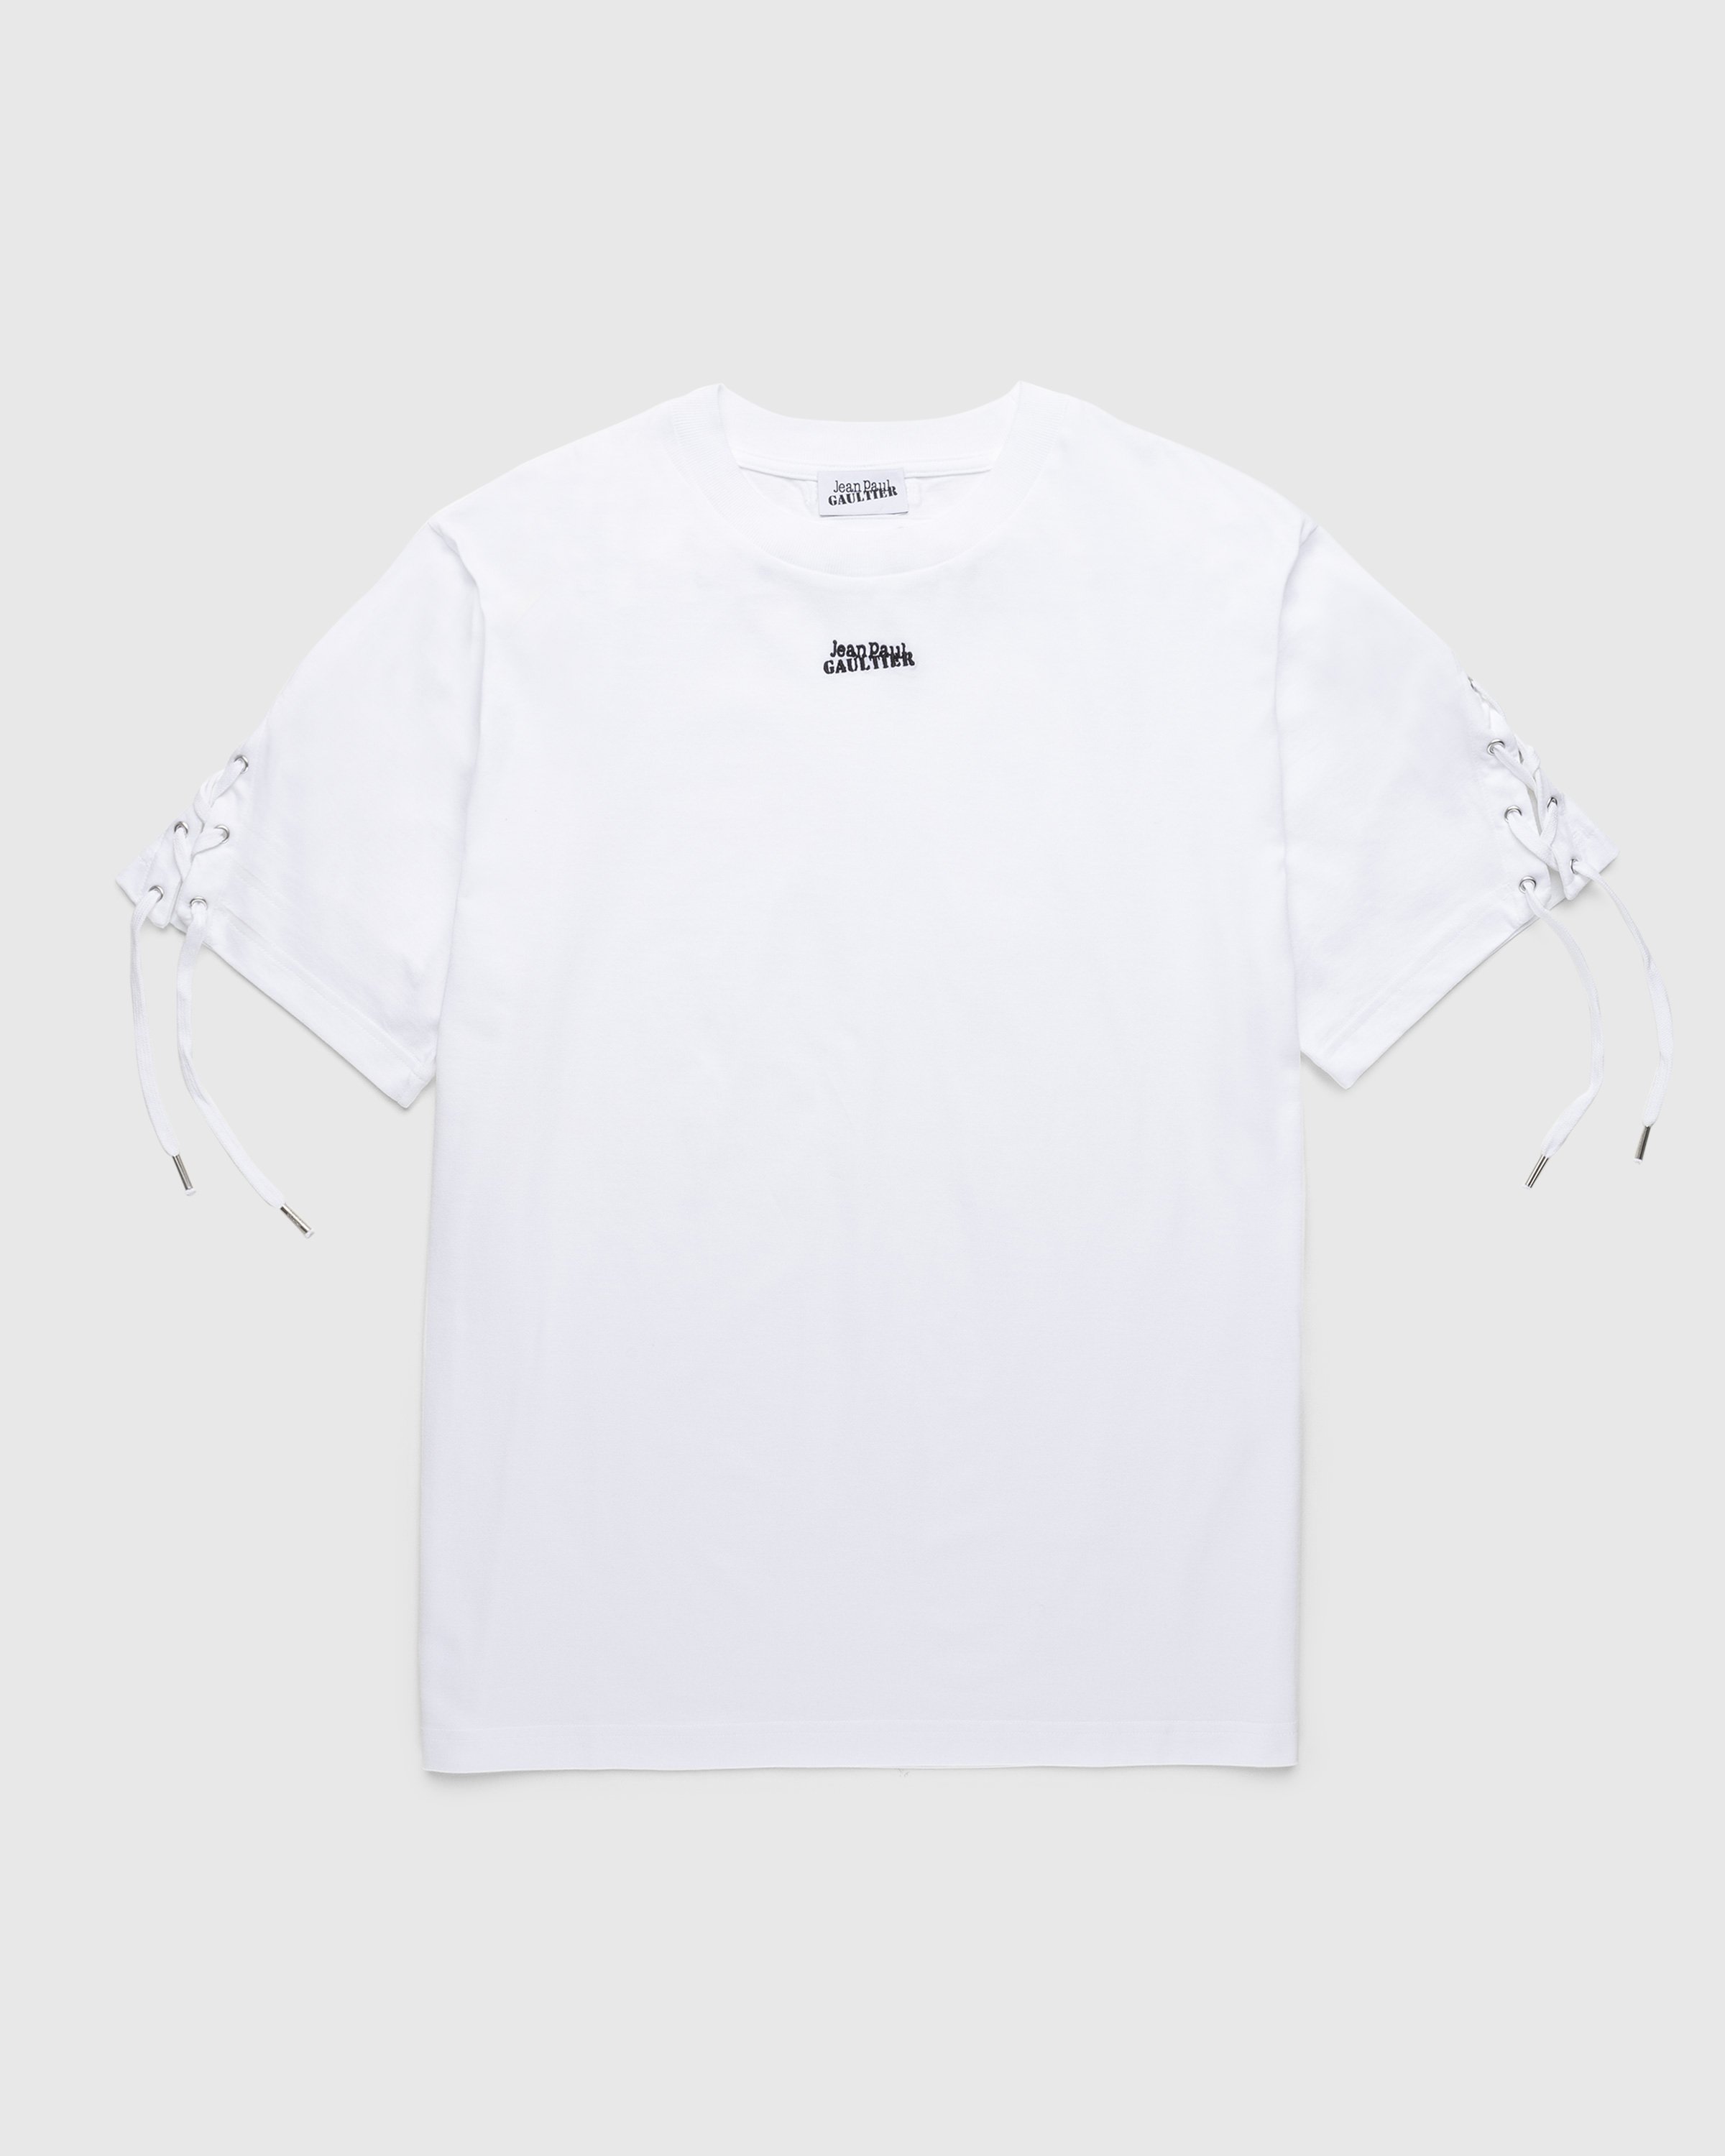 Jean Paul Gaultier - Oversize Laced T-Shirt White - Clothing - White - Image 1